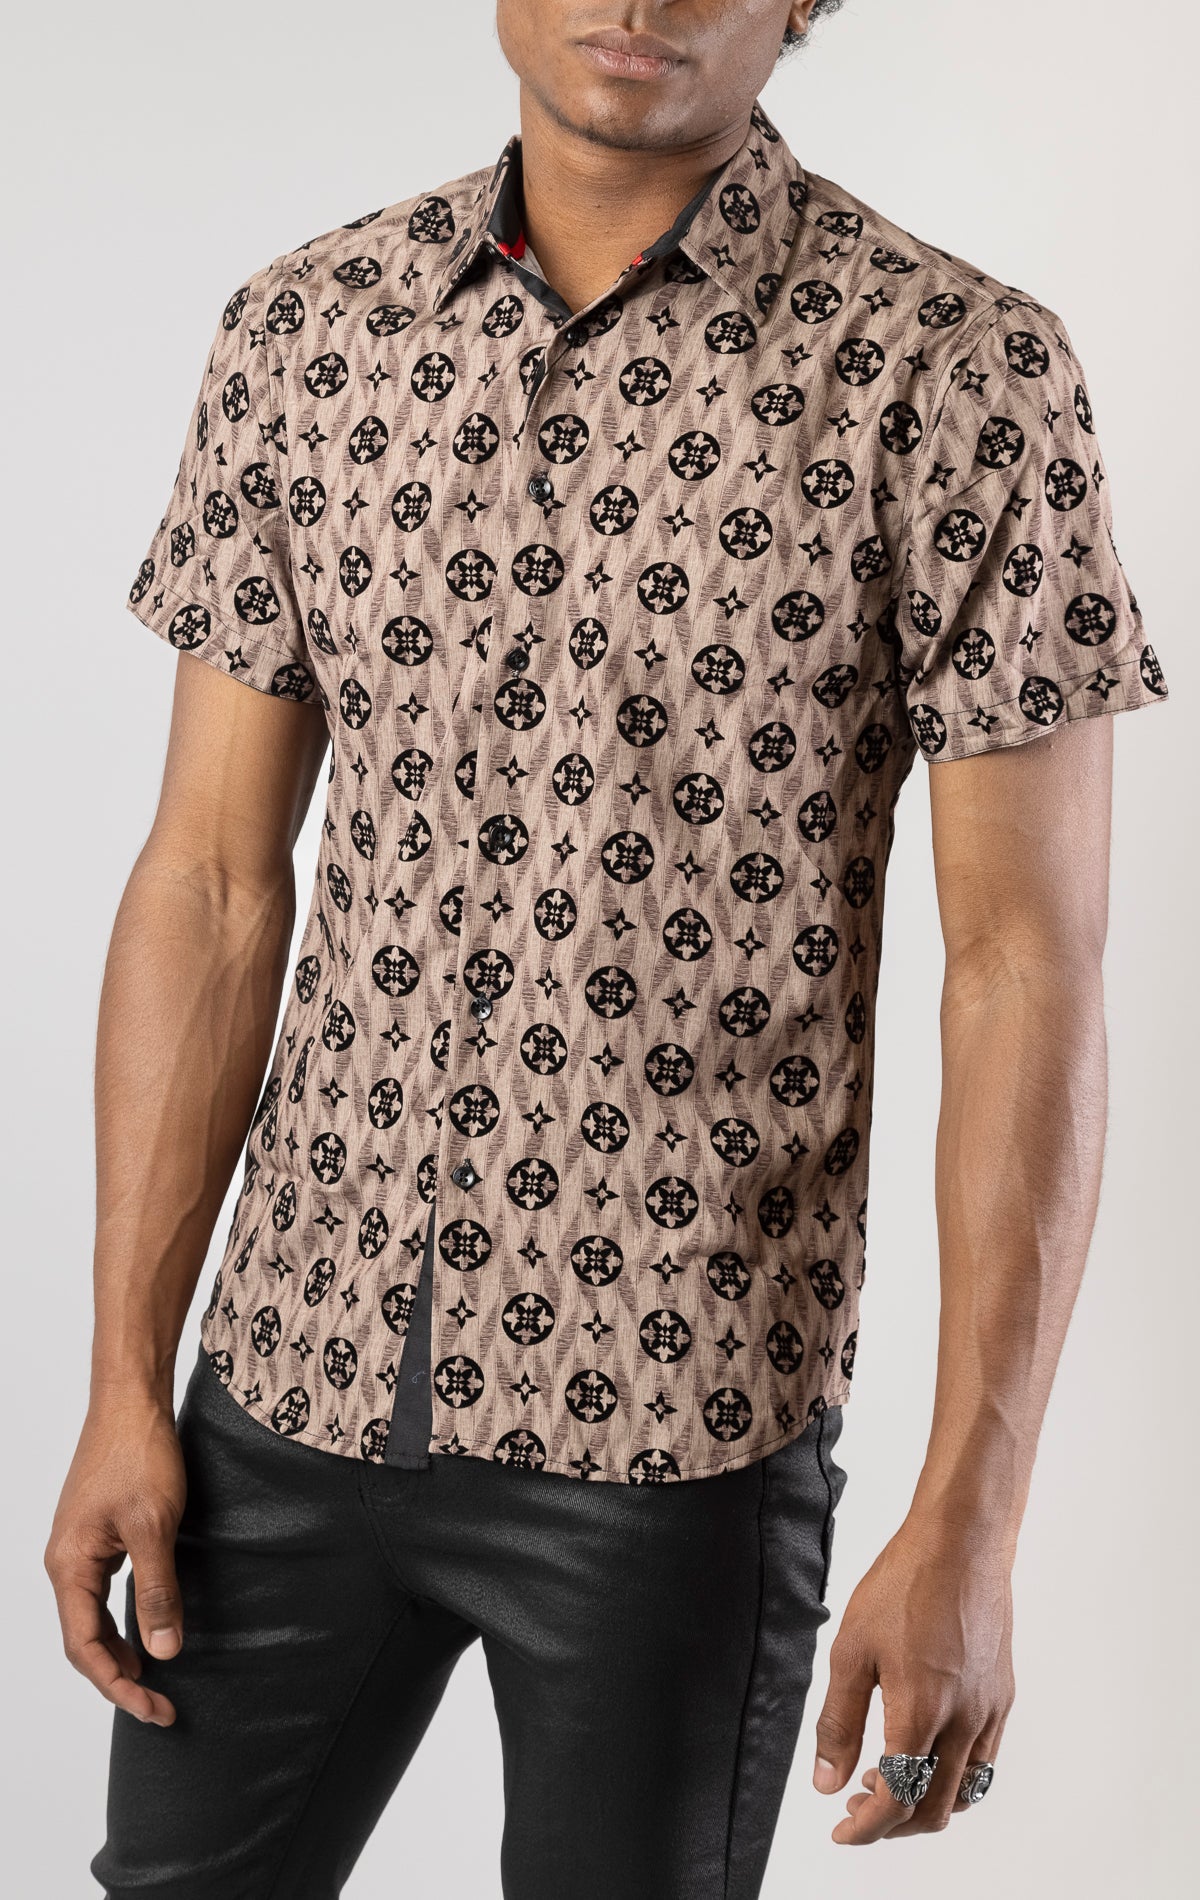 Brown Men's casual, relaxed-fit button-down shirt with a short sleeve design. The shirt features an all-over Greek key pattern and a front button closure.